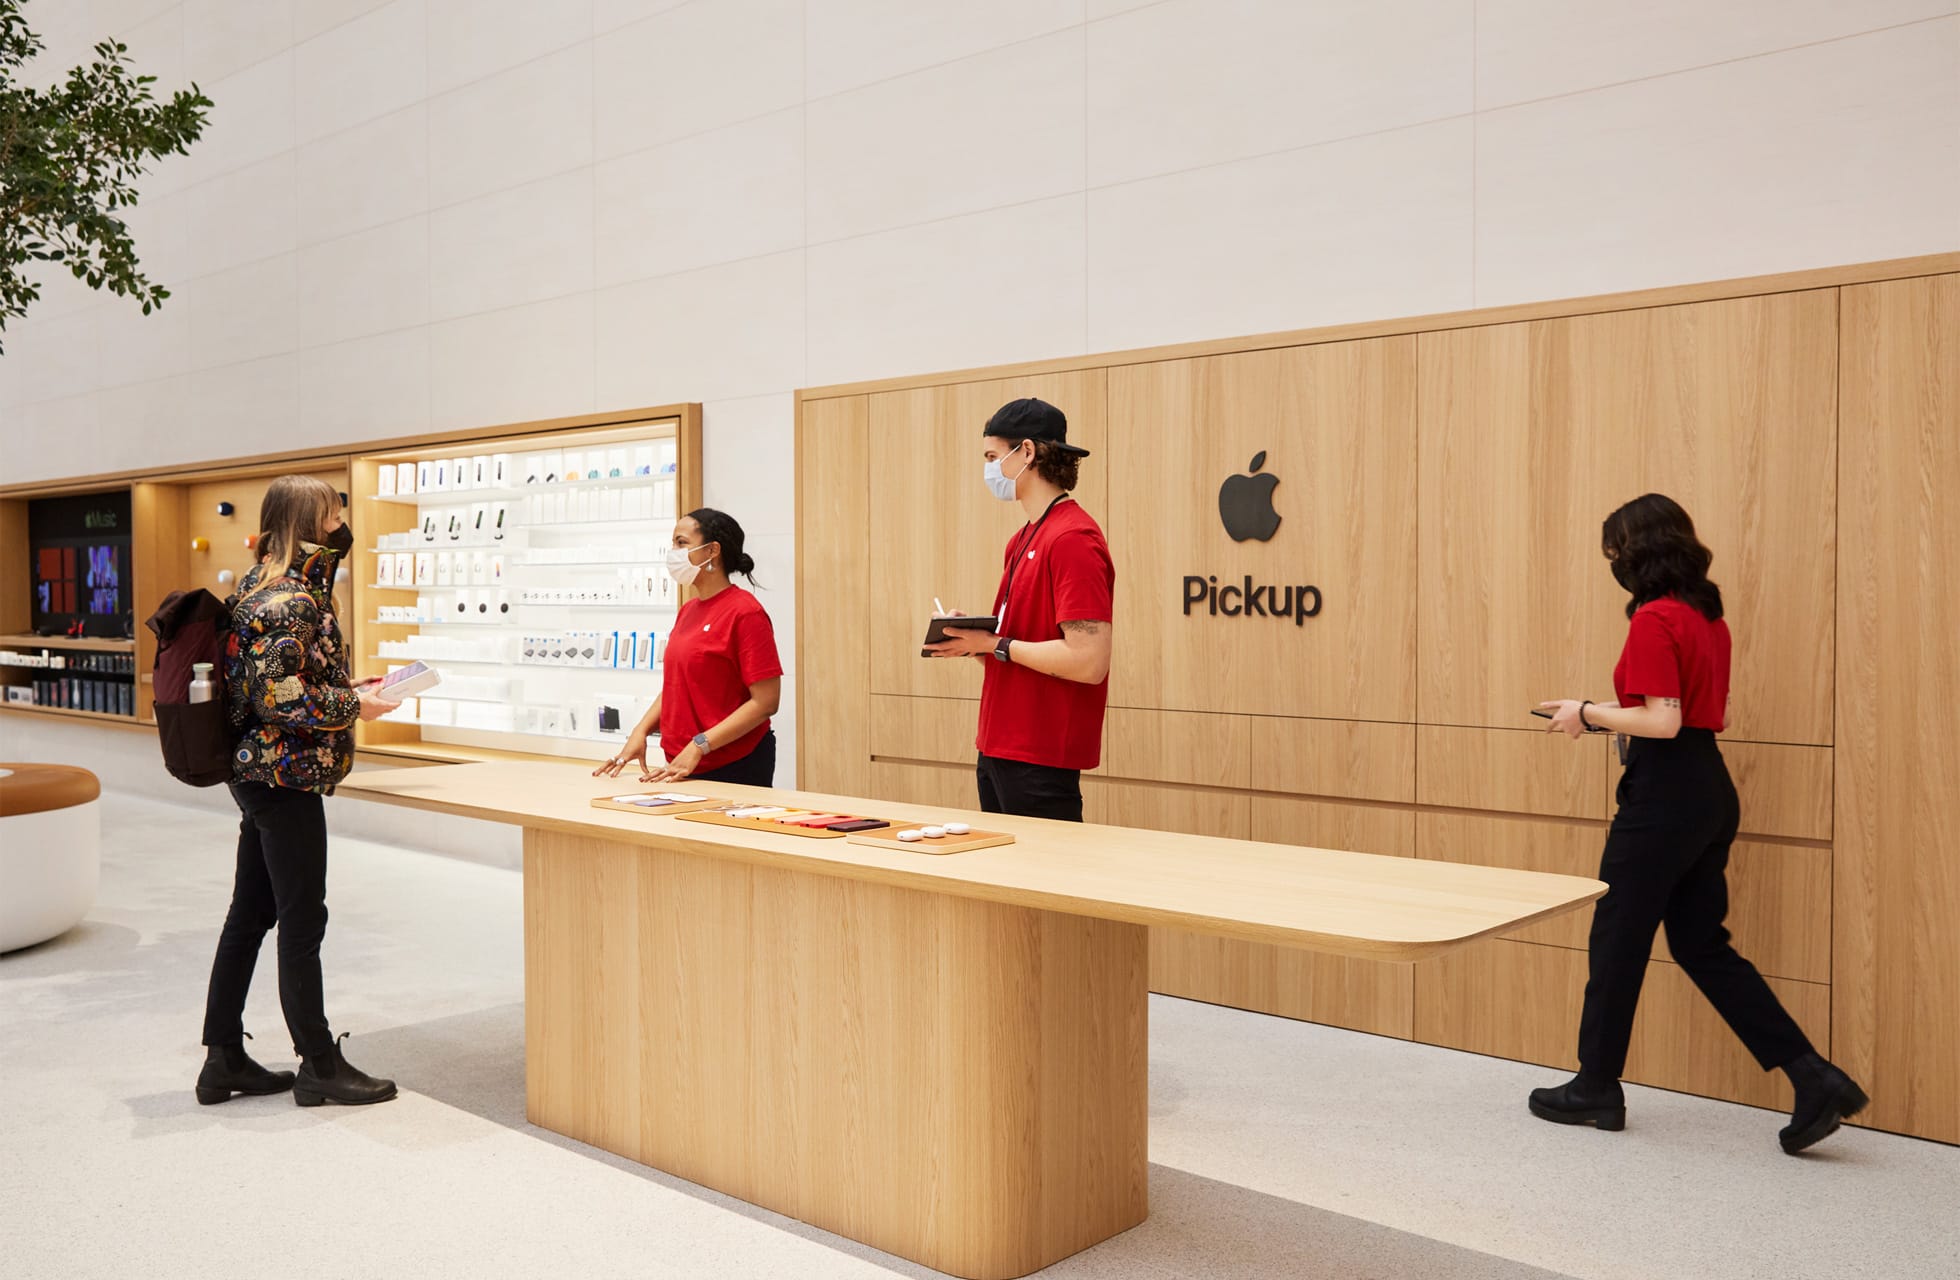 A photograph showing the Pickup section inside Apple's Rosenthaler Straße retail store in Berlin, Germany 